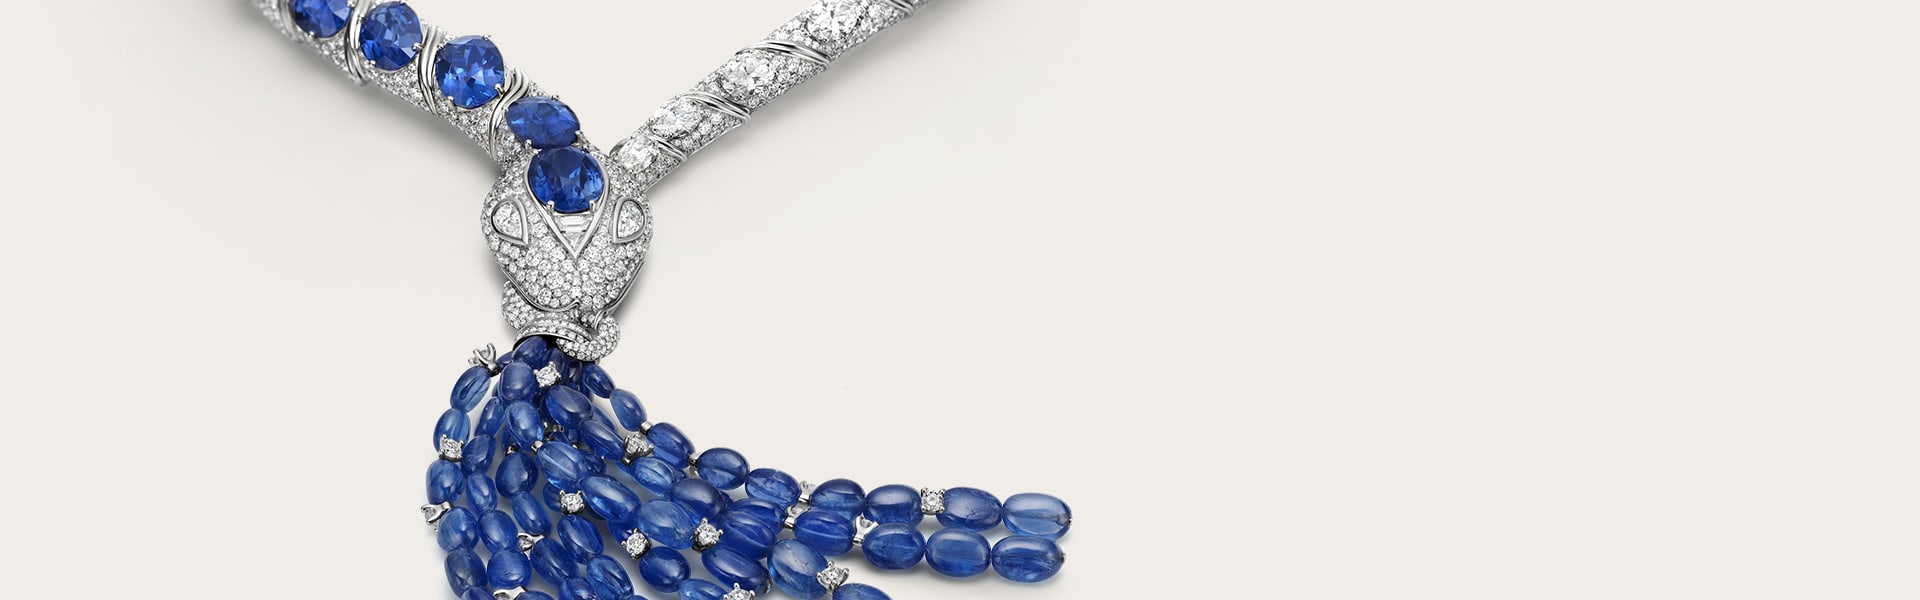 Mediterranean Sapphire Mediterranea High Jewelry white gold necklace with sapphires and diamonds, close-up.